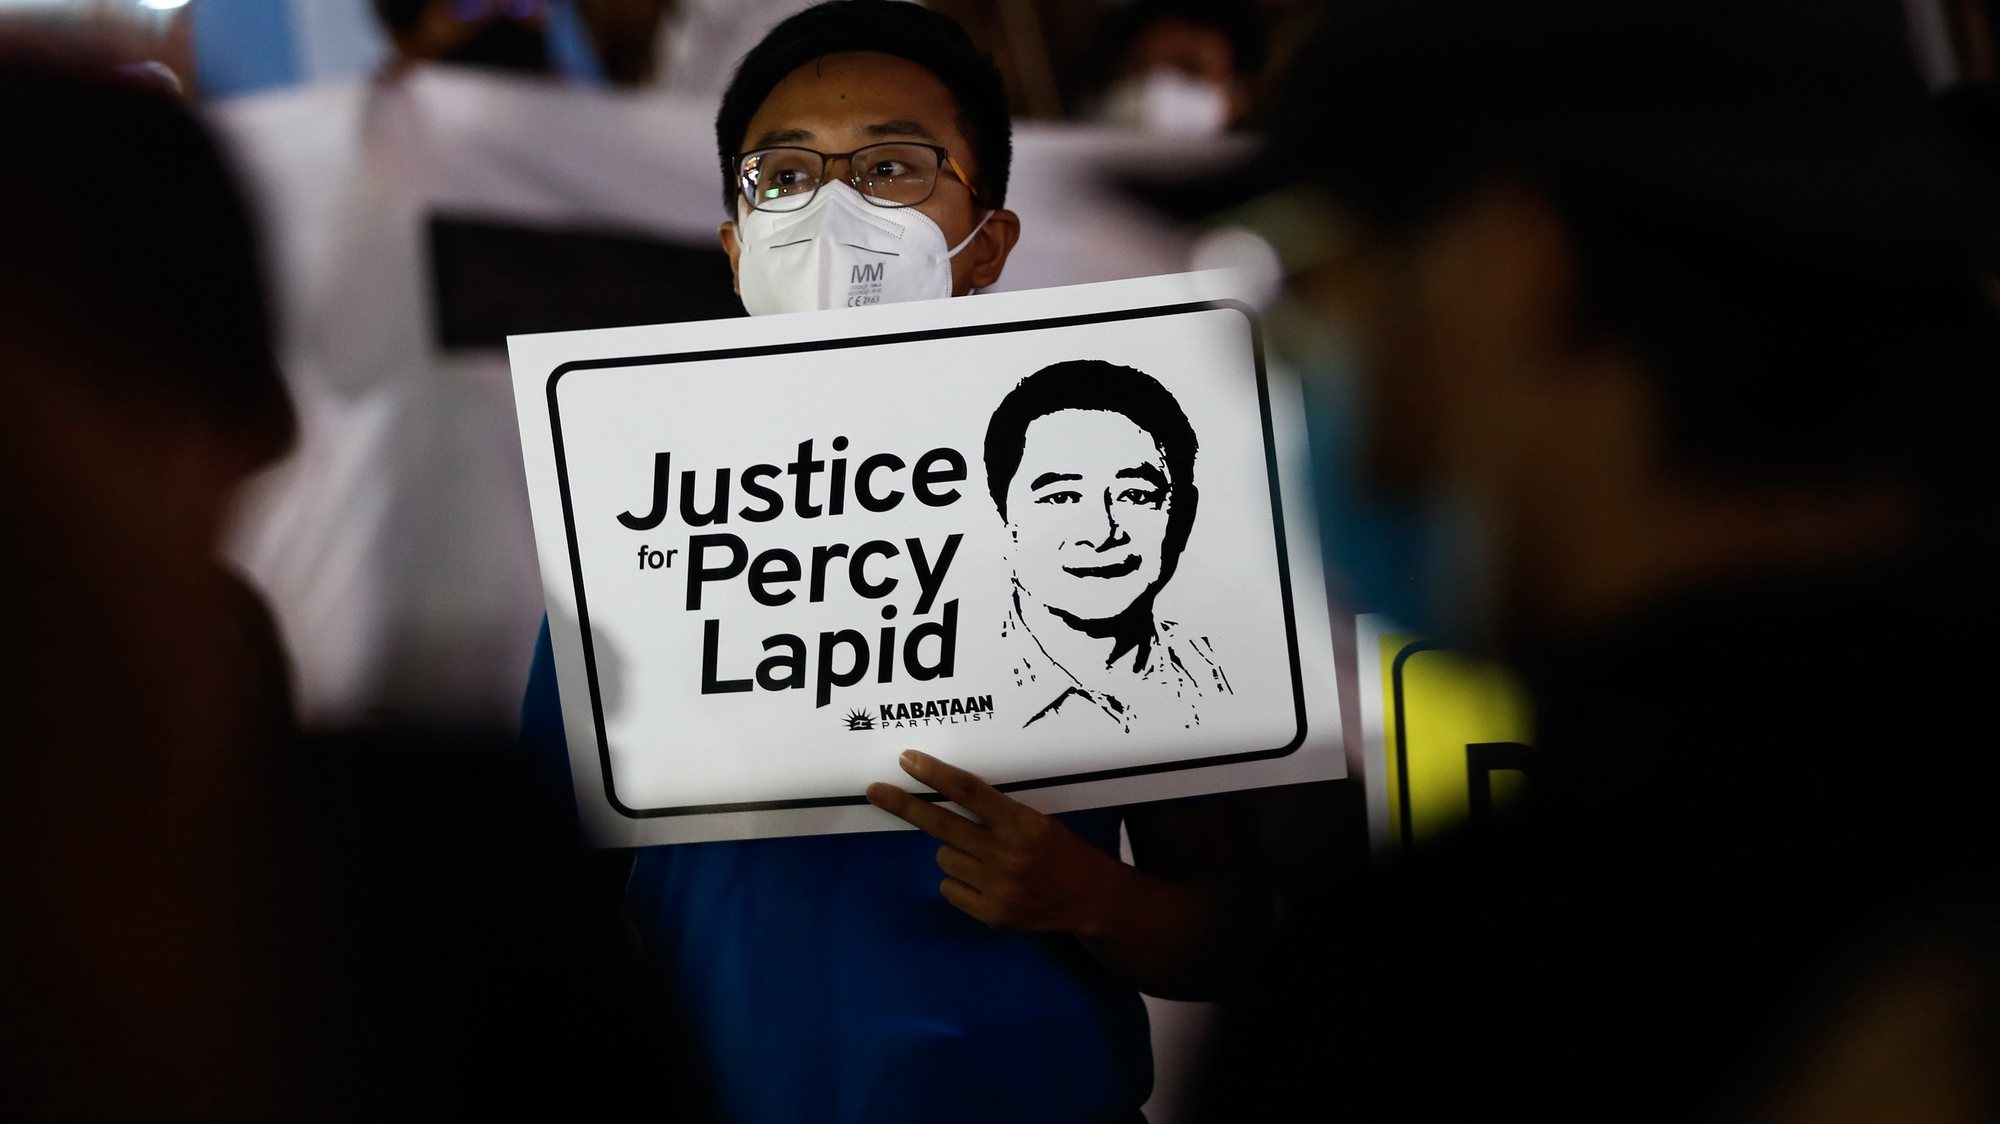 epa10222813 A protester holds a sign with an image of slain broadcast journalist Percy Mabasa, also known as Percy Lapid, during an indignation rally against members of the media&#039;s killings in Quezon City, Metro Manila, Philippines, 04 October 2022. A rally was held by human rights advocates and members of journalist organizations to demand government action and condemn the killing of broadcast journalist Percival Mabasa, also known as Percy Lapid, who was shot dead by unidentified assailants on 03 October while on his way to work in Las Pinas City, according to latest police reports.  EPA/ROLEX DELA PENA